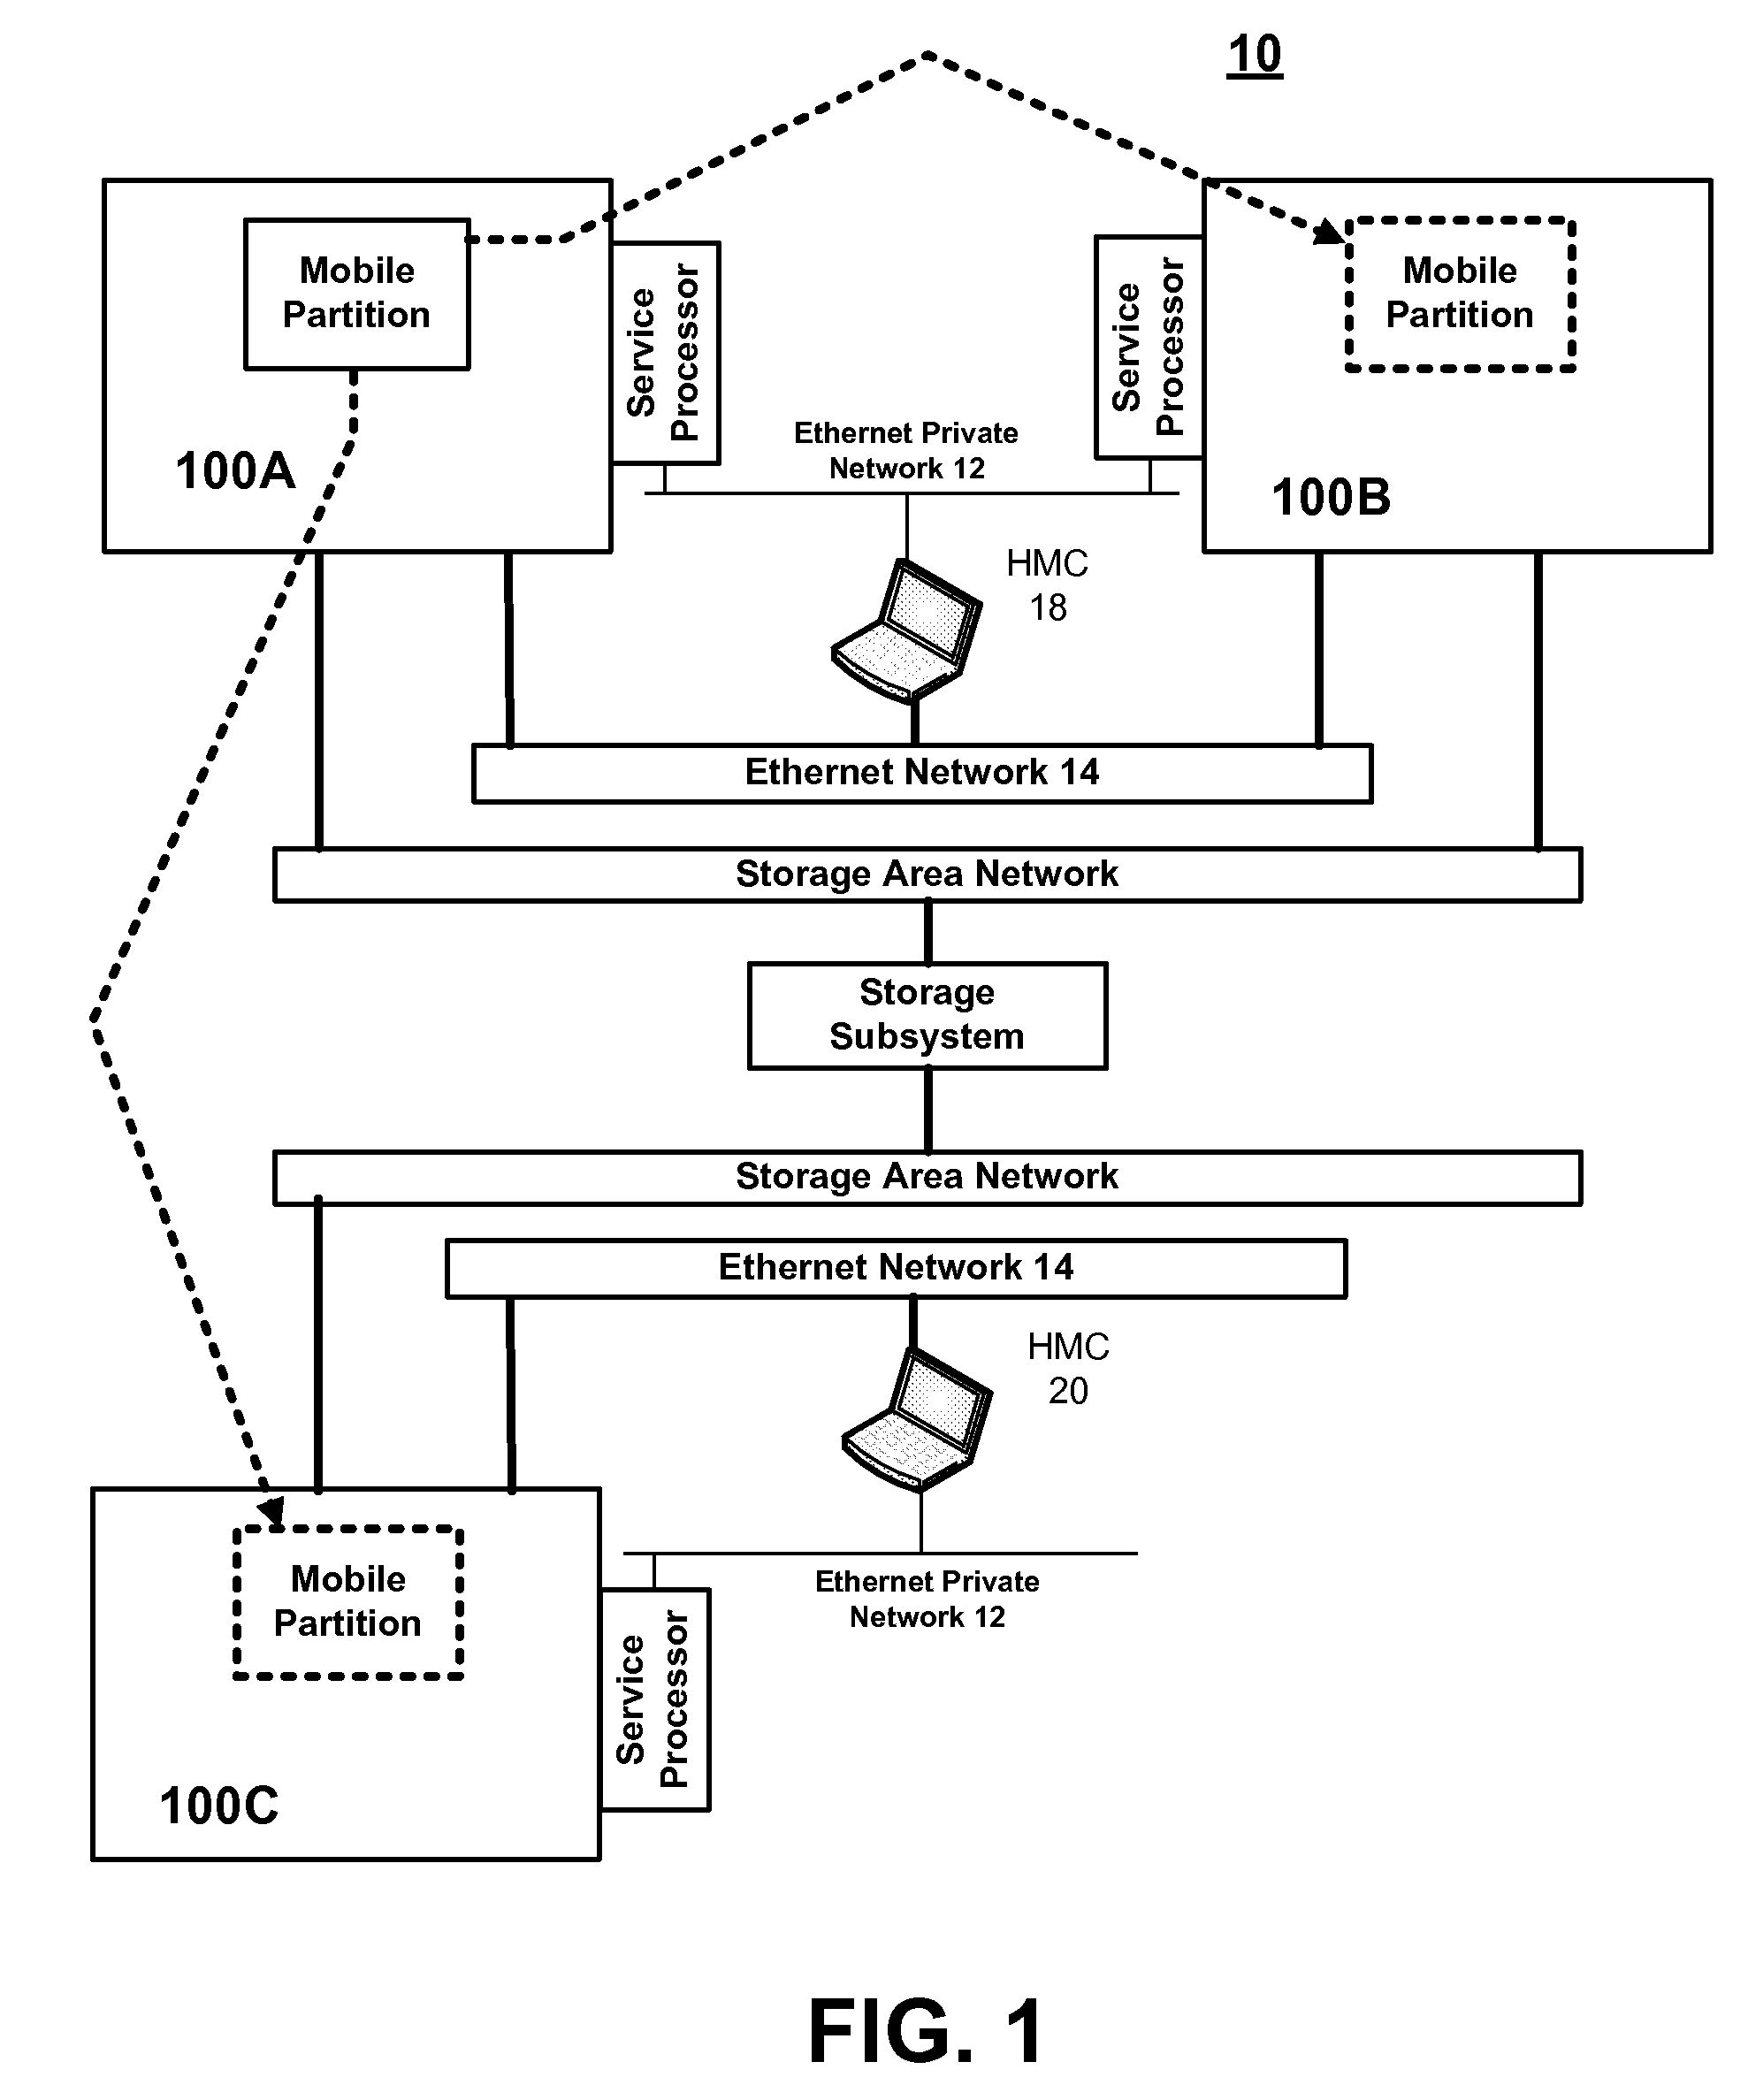 Moving Resources In a Computing Environment Having Multiple Logically-Partitioned Computer Systems